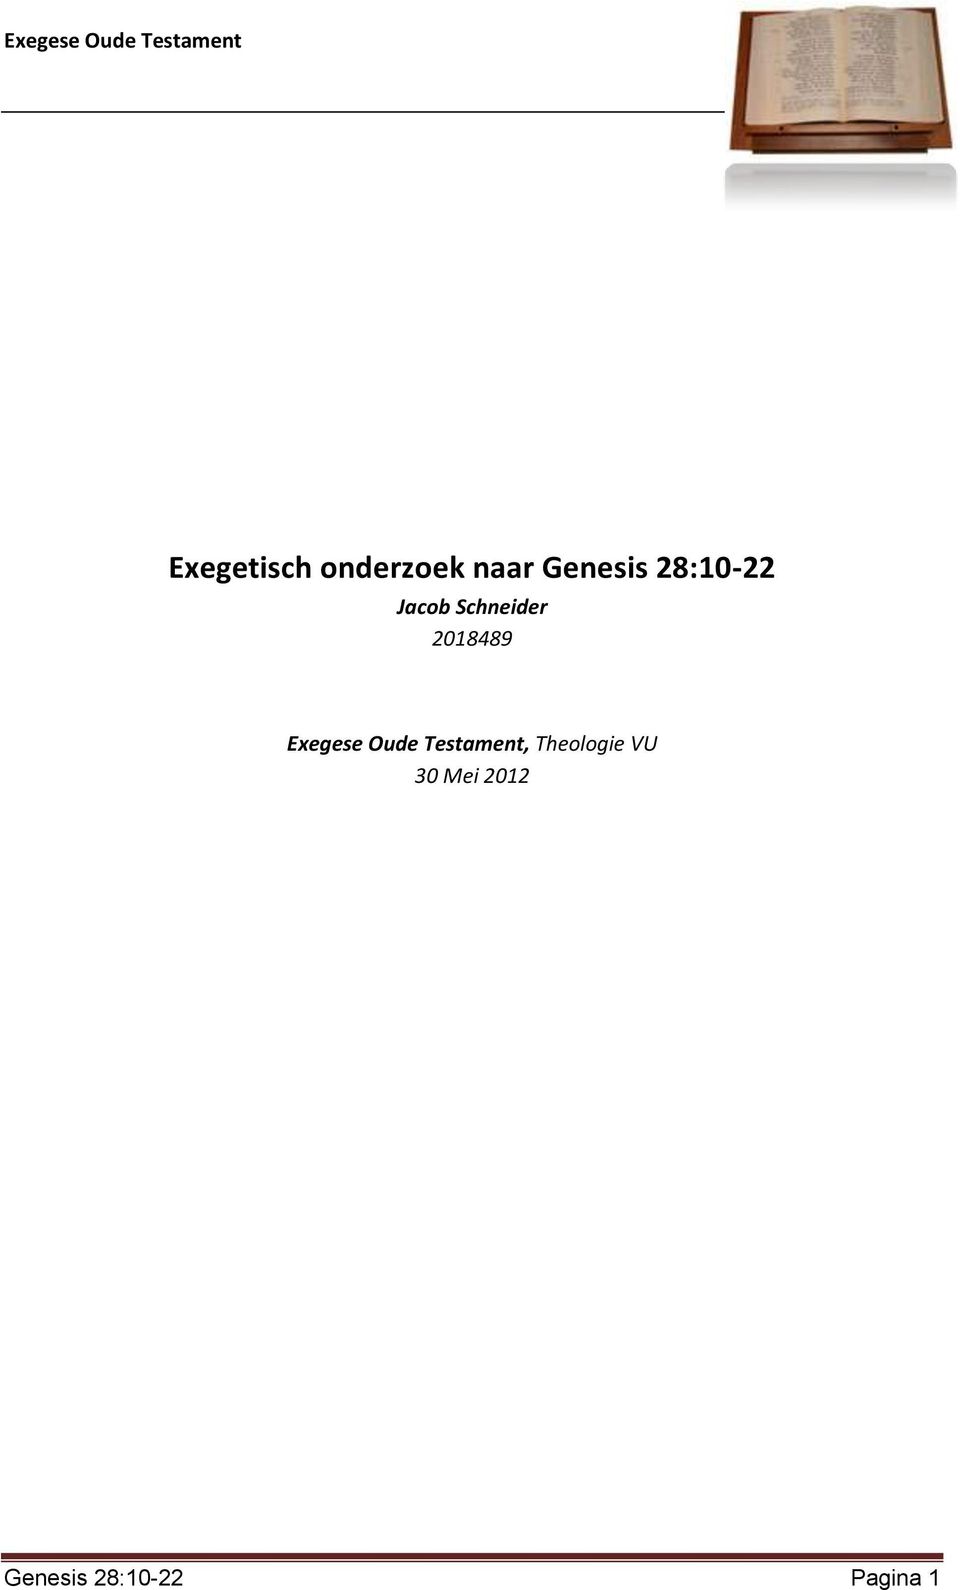 Exegese Oude Testament, Theologie